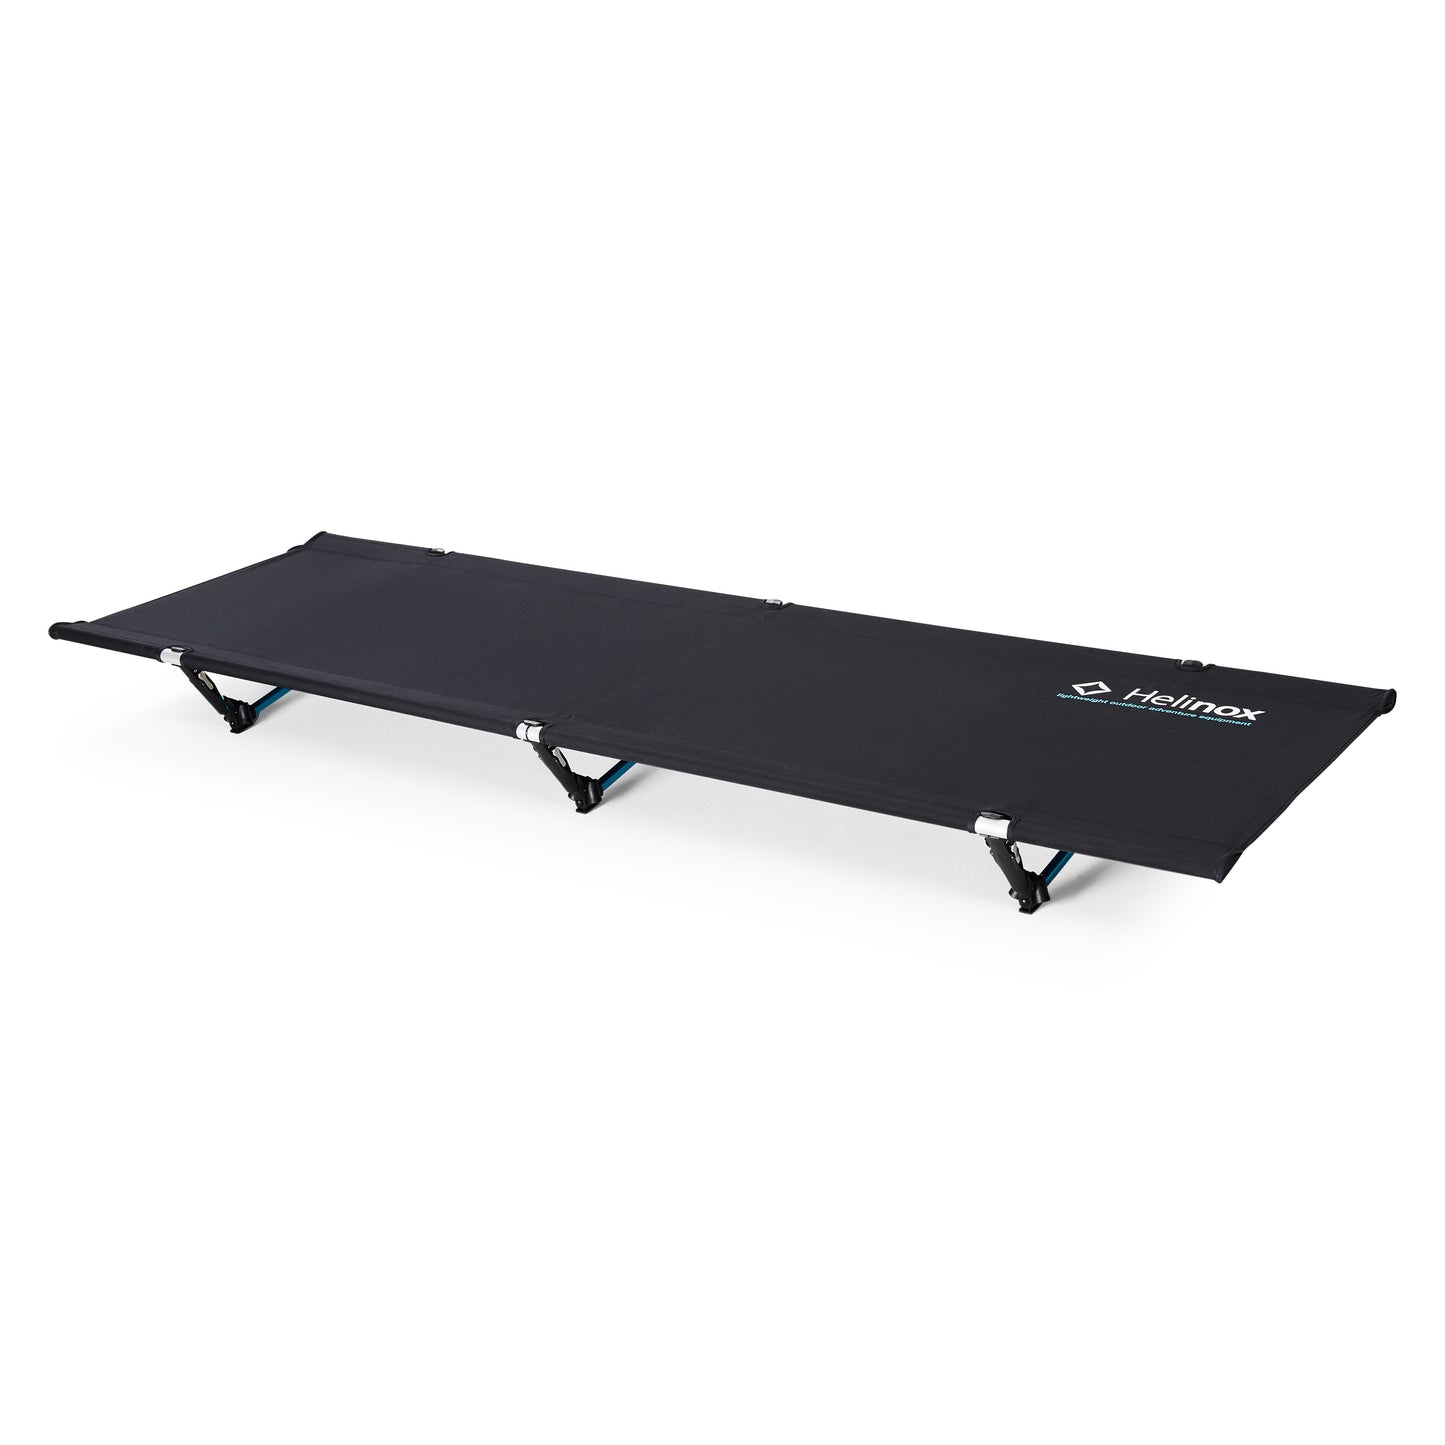 Cot One Convertible Long - Black